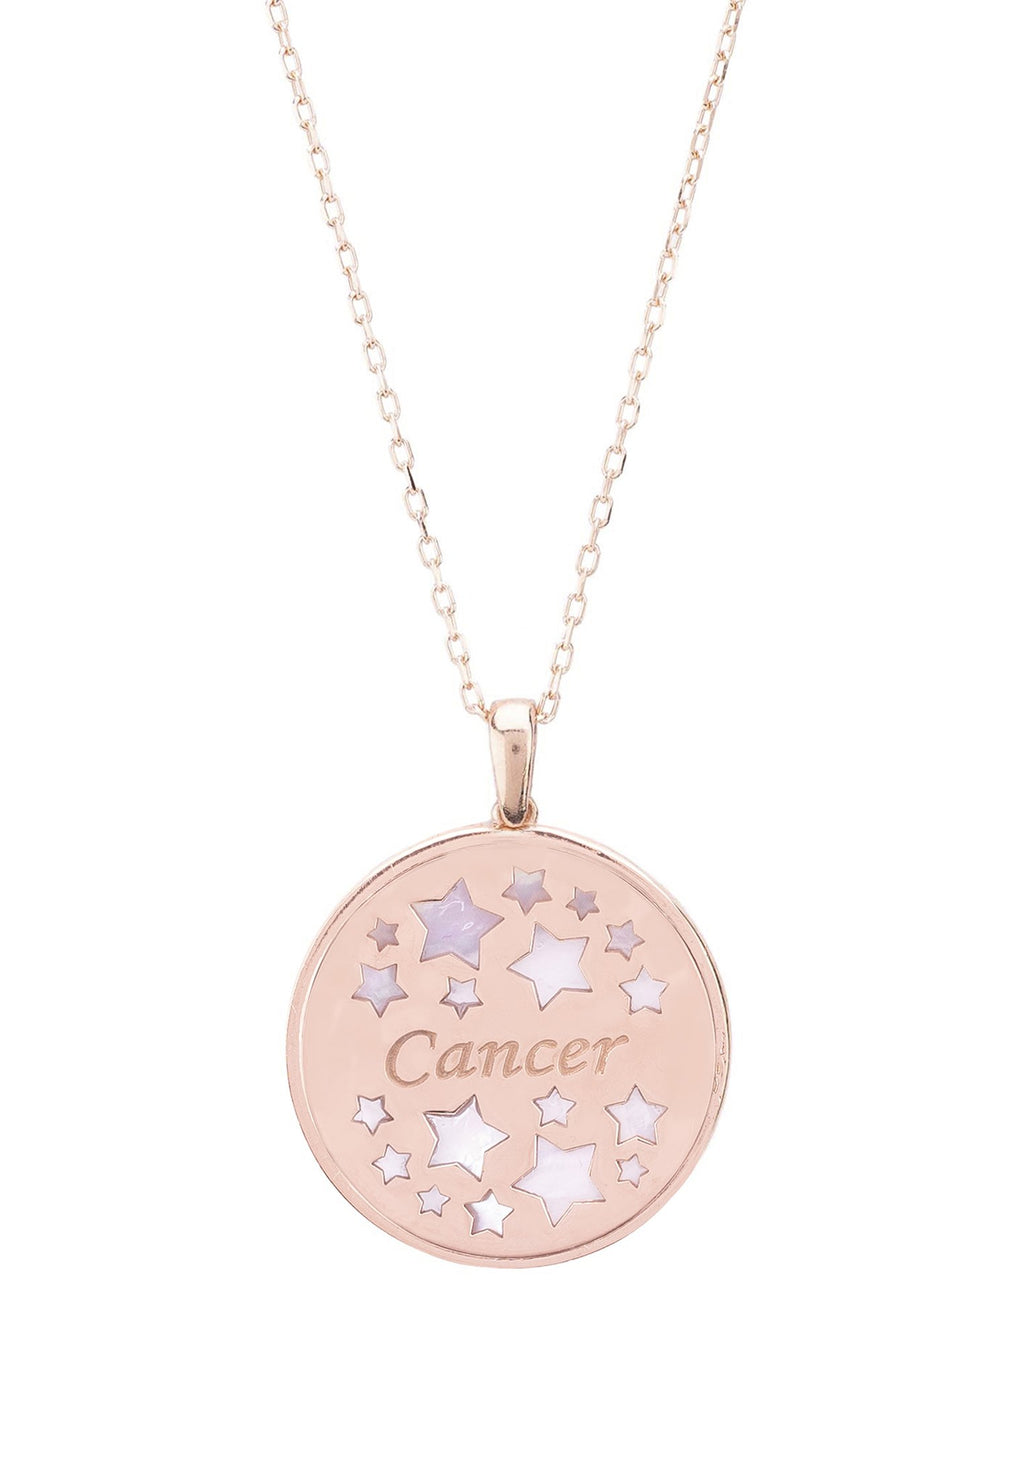 Zodiac Mother of Pearl Gemstone Star Constellation Pendant Necklace Cancer